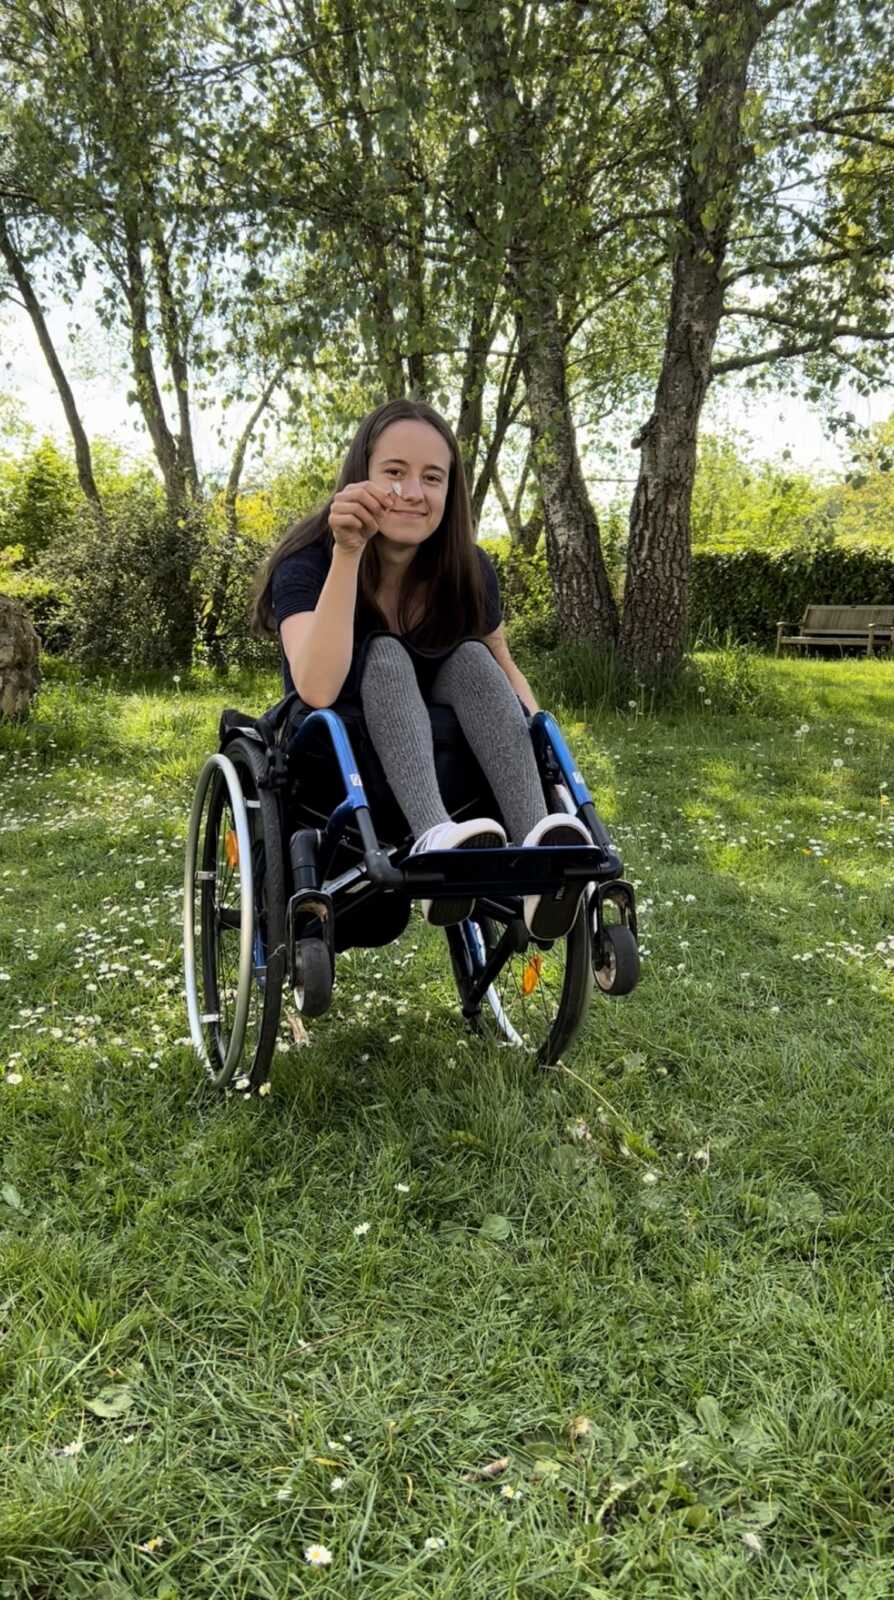 paraplegic woman holding small flower she picked from grass